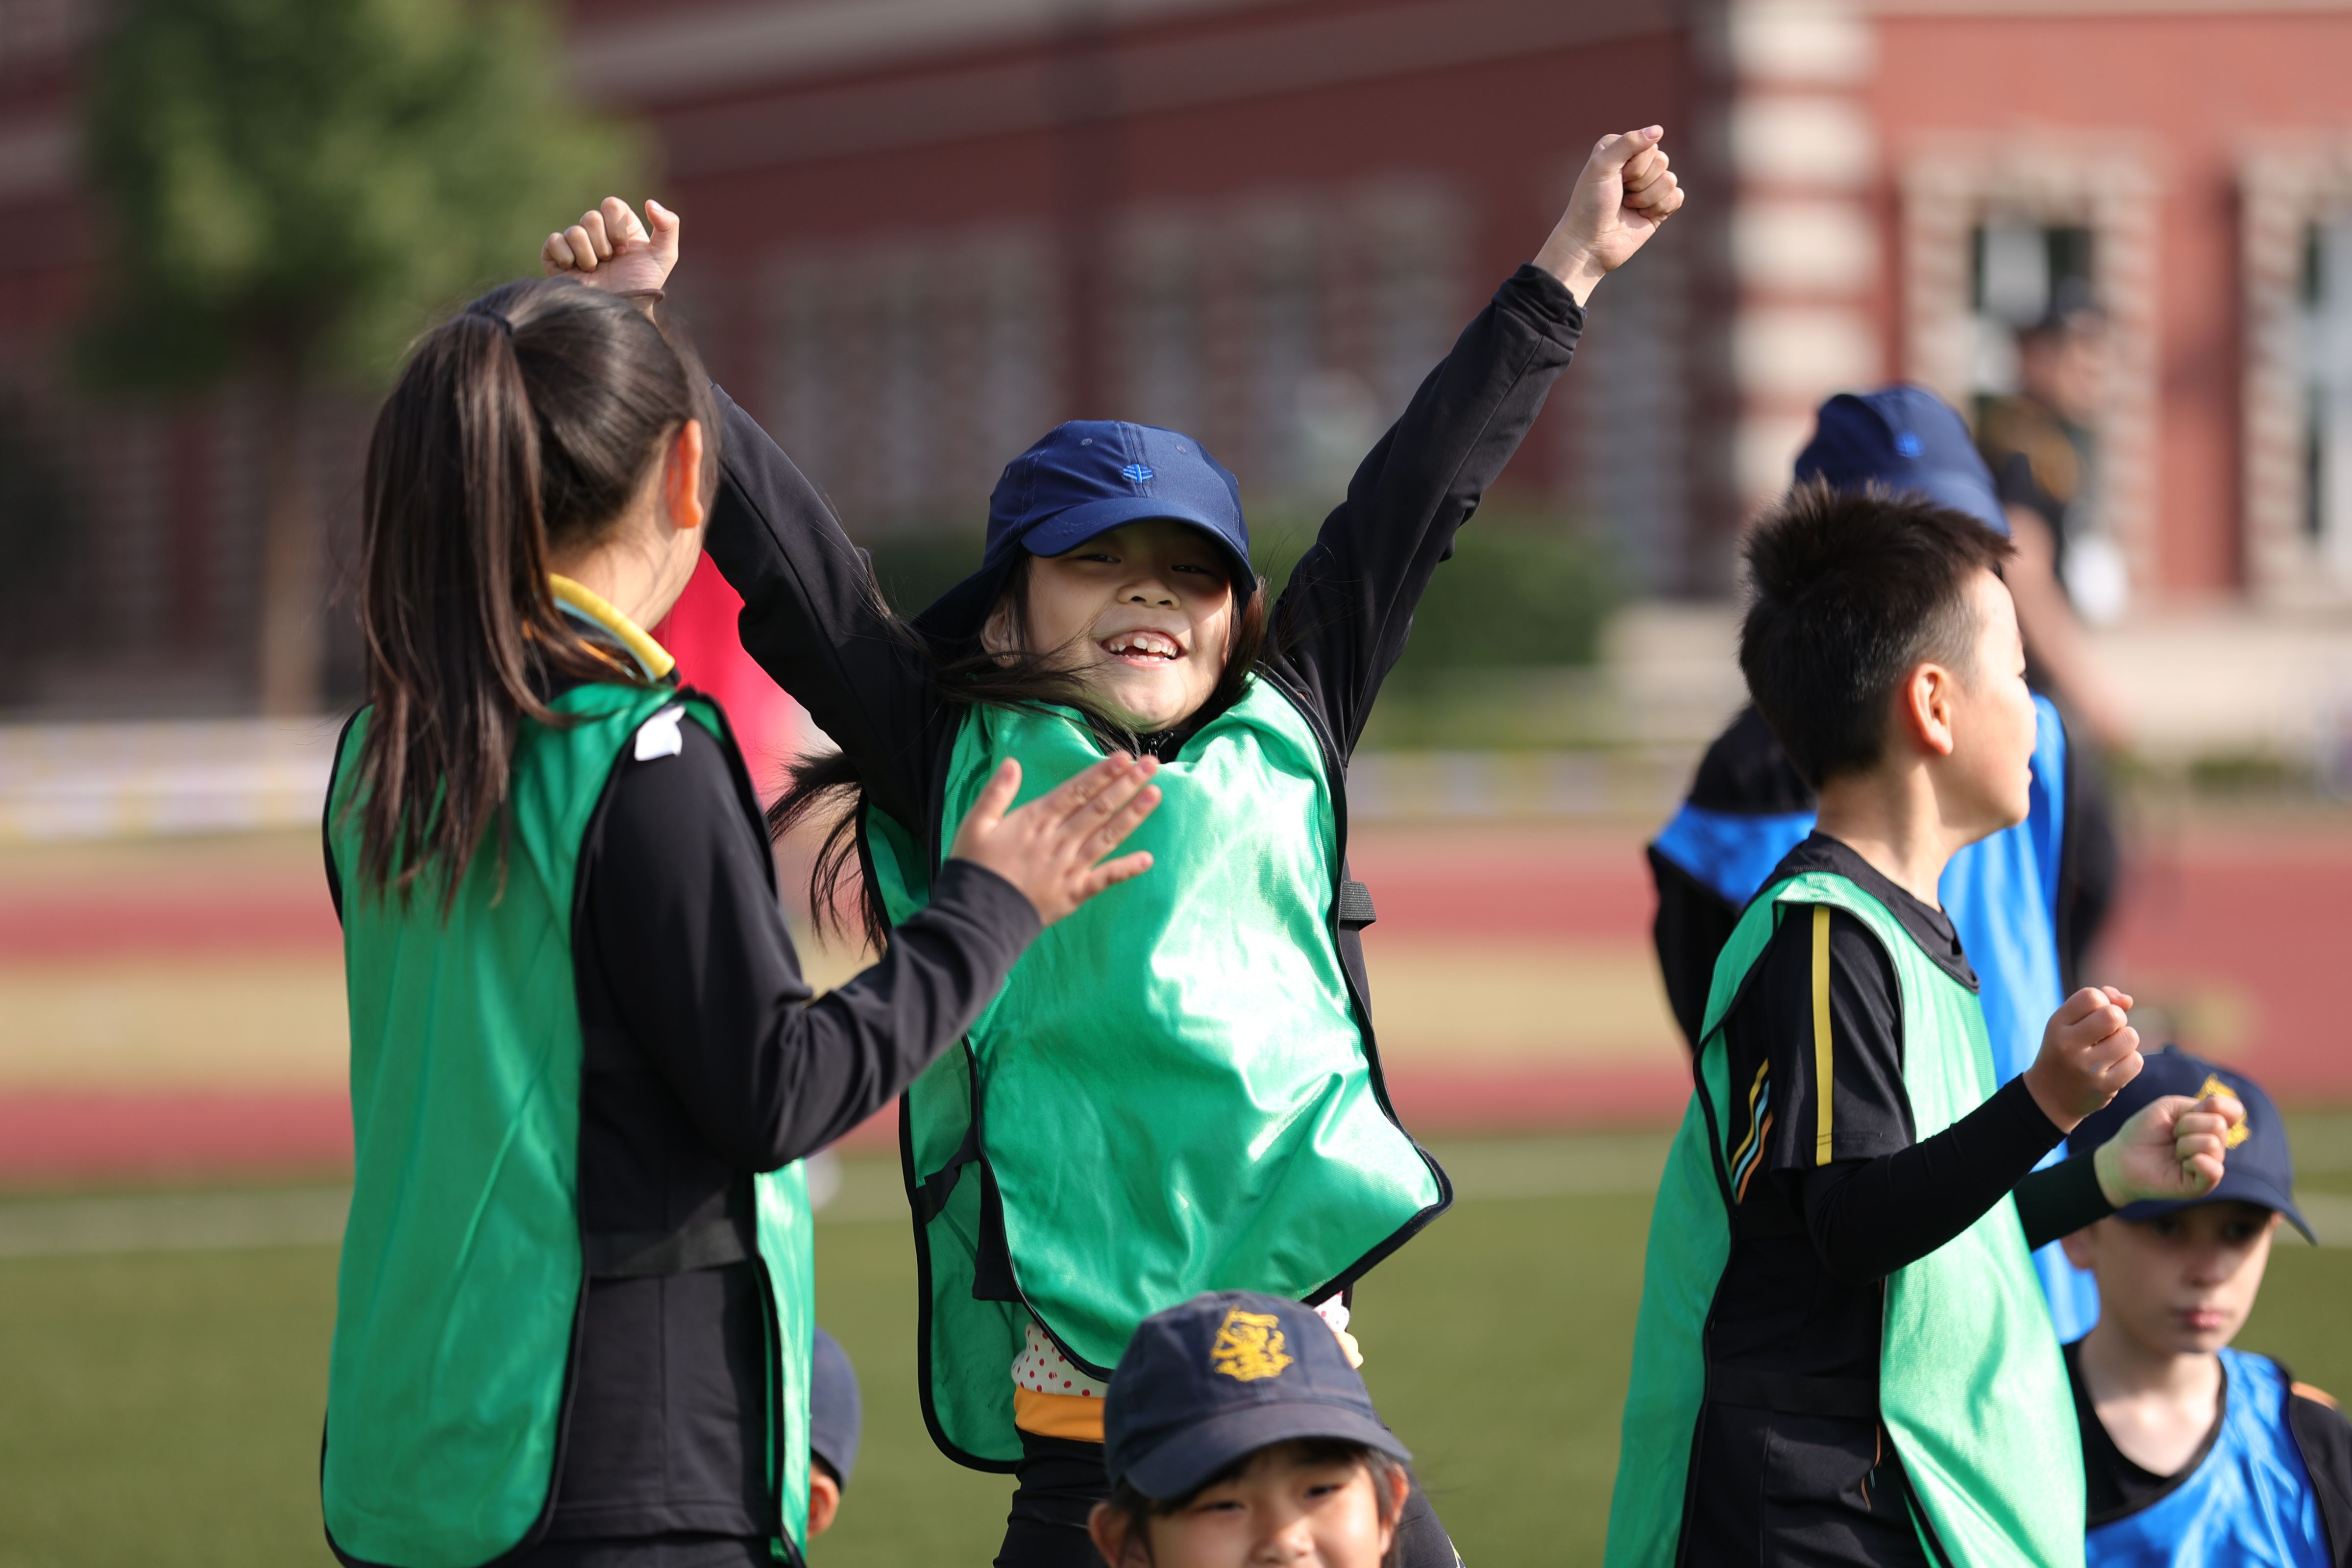 Sports Day: Fostering team spirit in physical activities